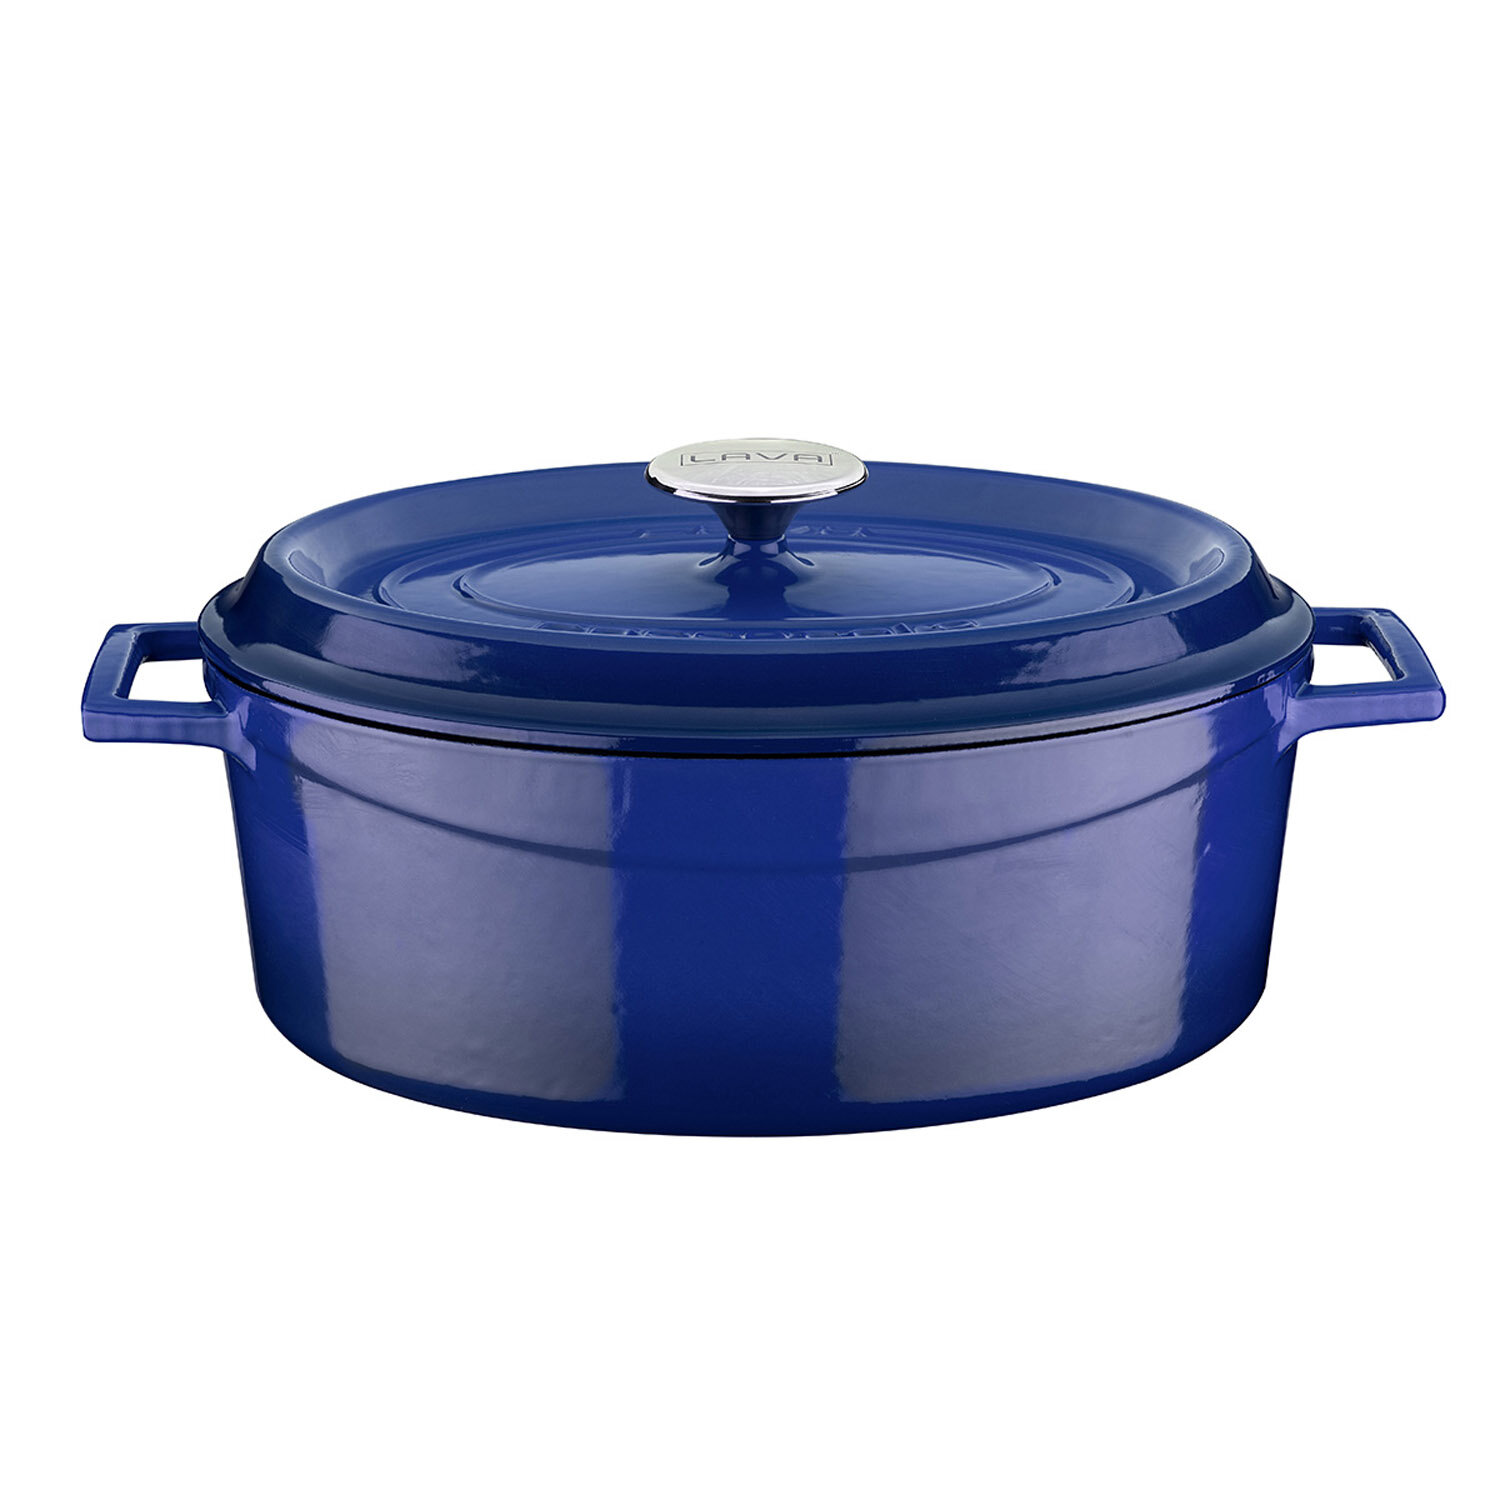 Green 4,67 Liter 23 x 29 cm Functional and Ergonomic Design Lava Cast Iron Oval Dutch Oven with Lid 